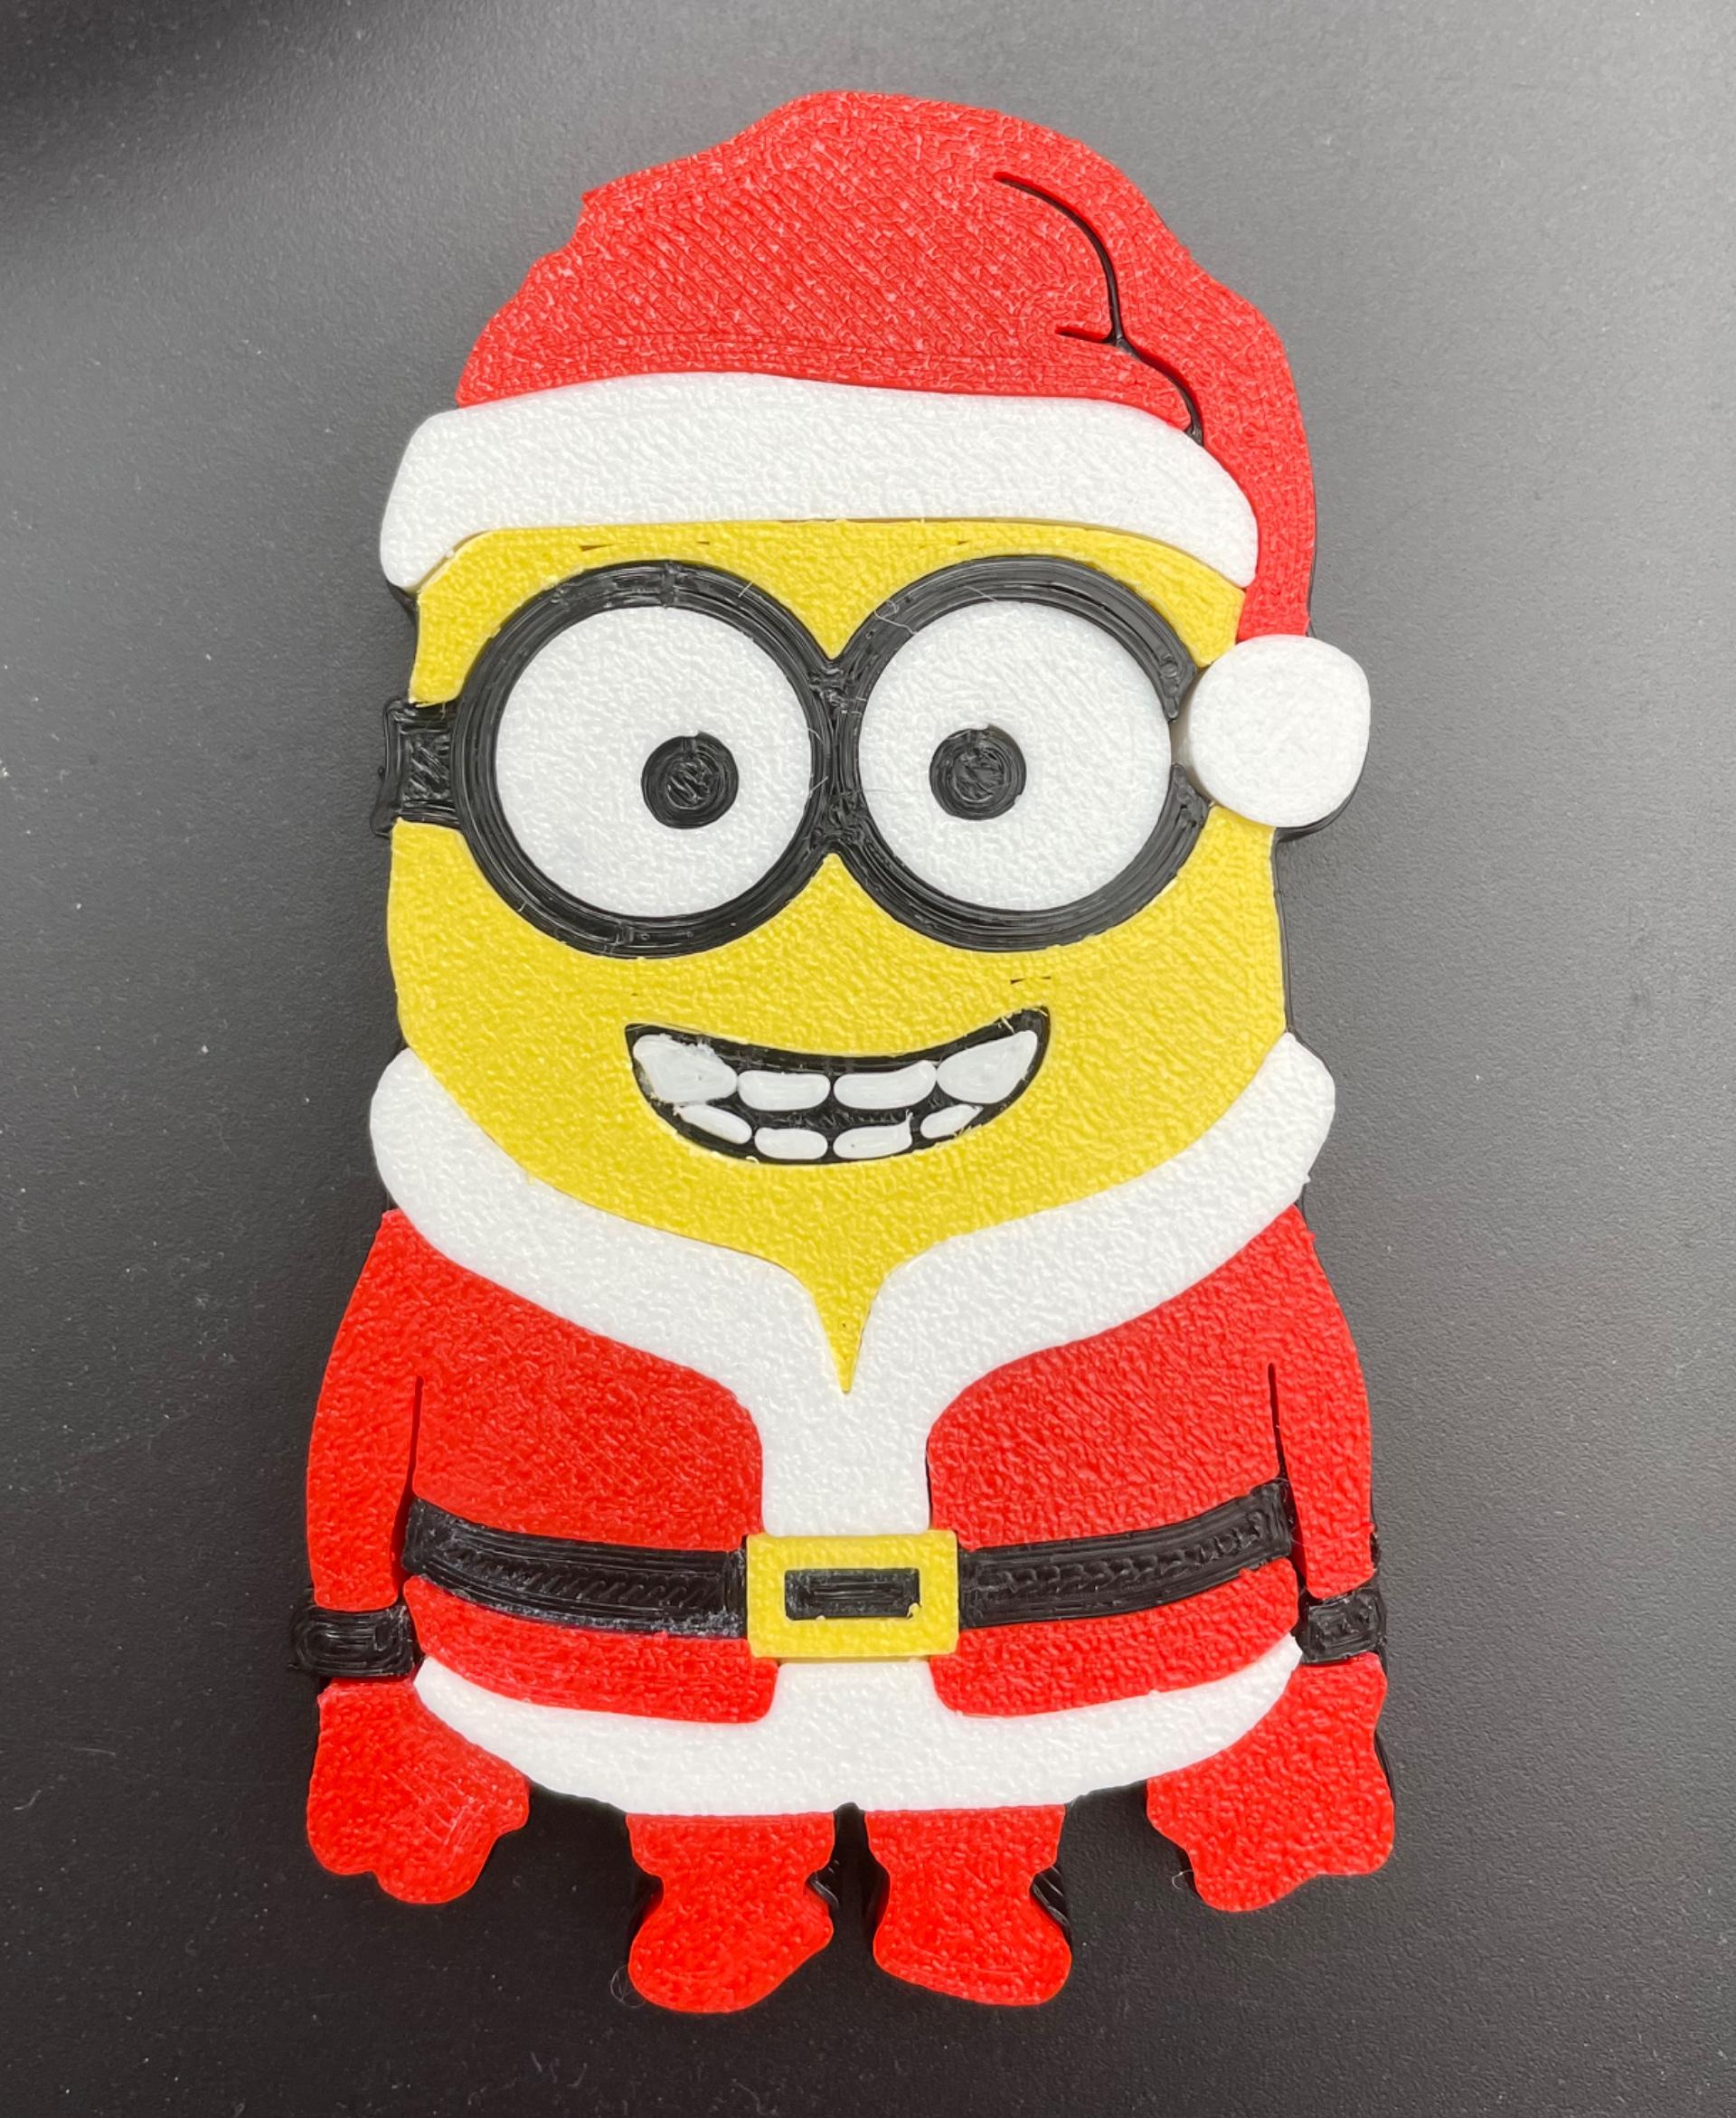 CHRISTMAS MINION - The Christmas Minion model printed great! I scaled this model down to 75% in my slicer and is still fit together quite nicely. I definitely recommend printing out this awesome model for the Holiday season! - 3d model